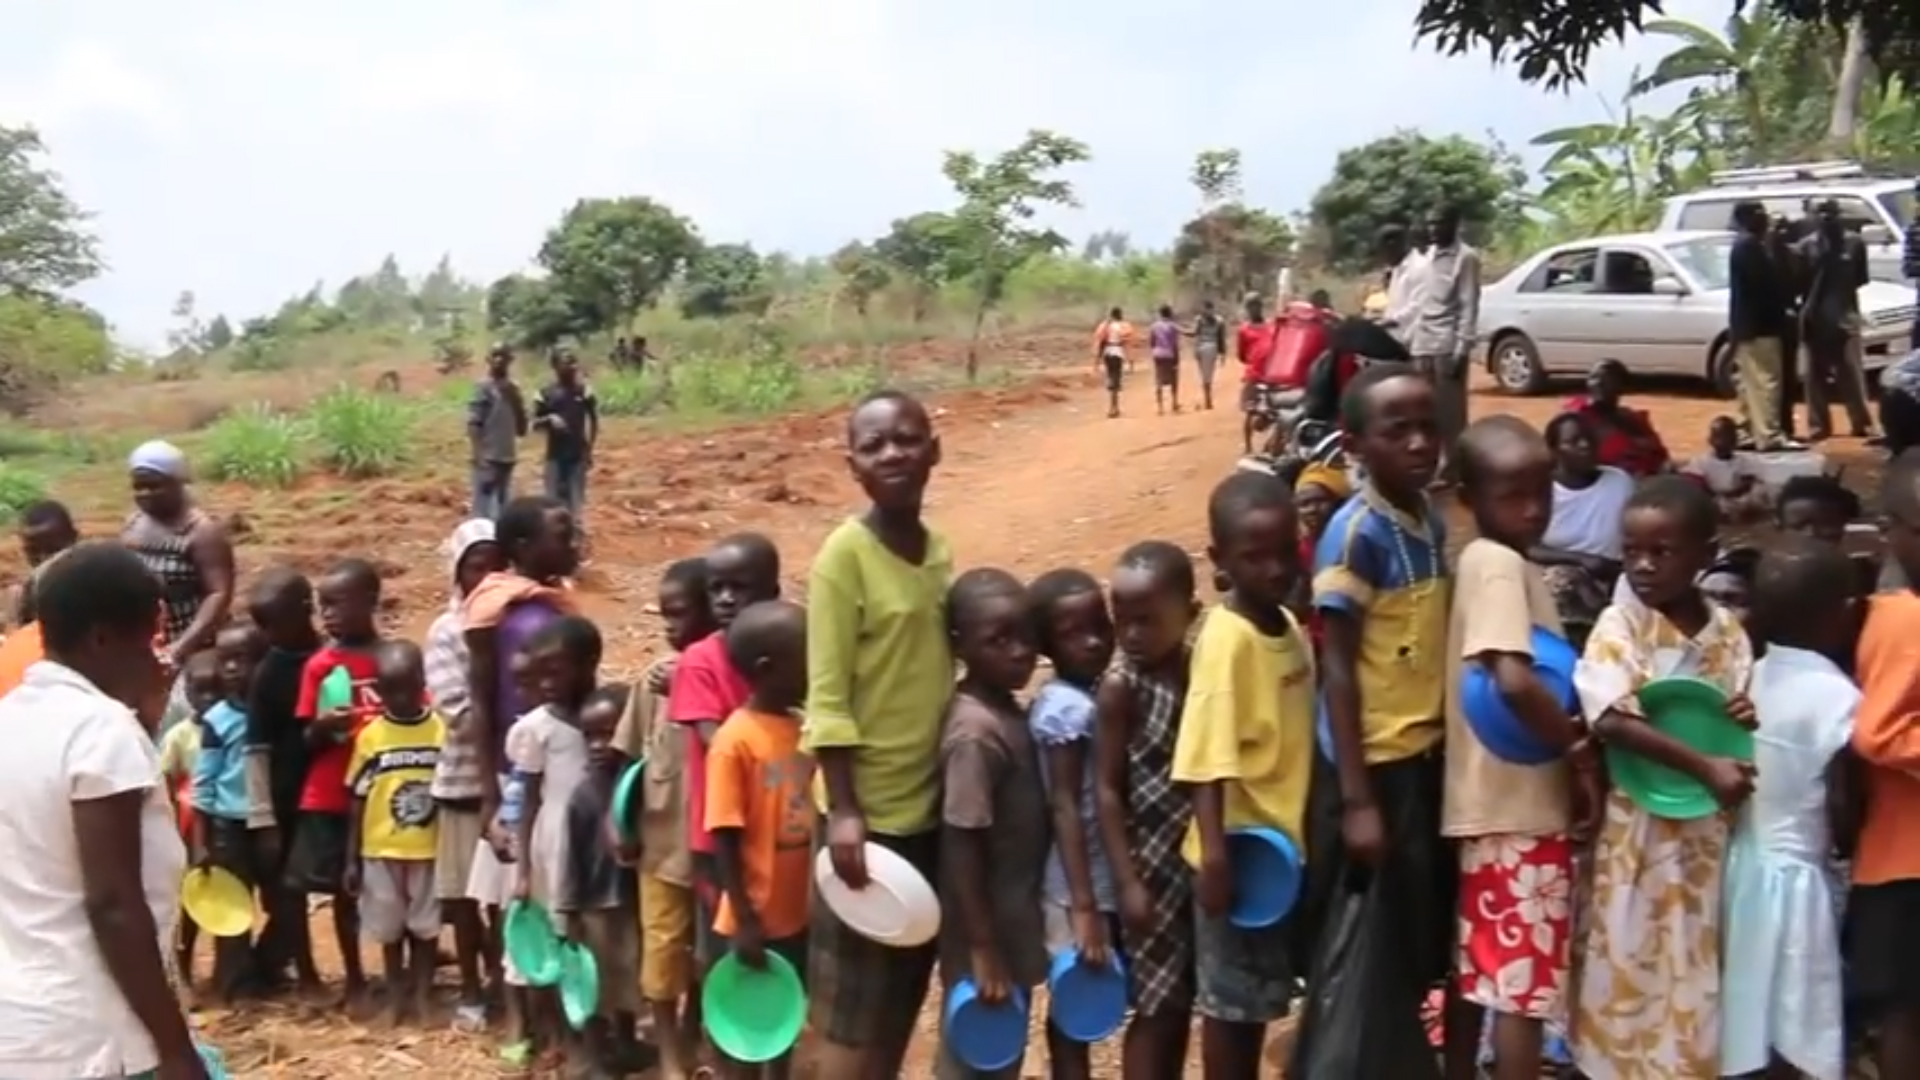 kids lined up to get a meal in Uganda